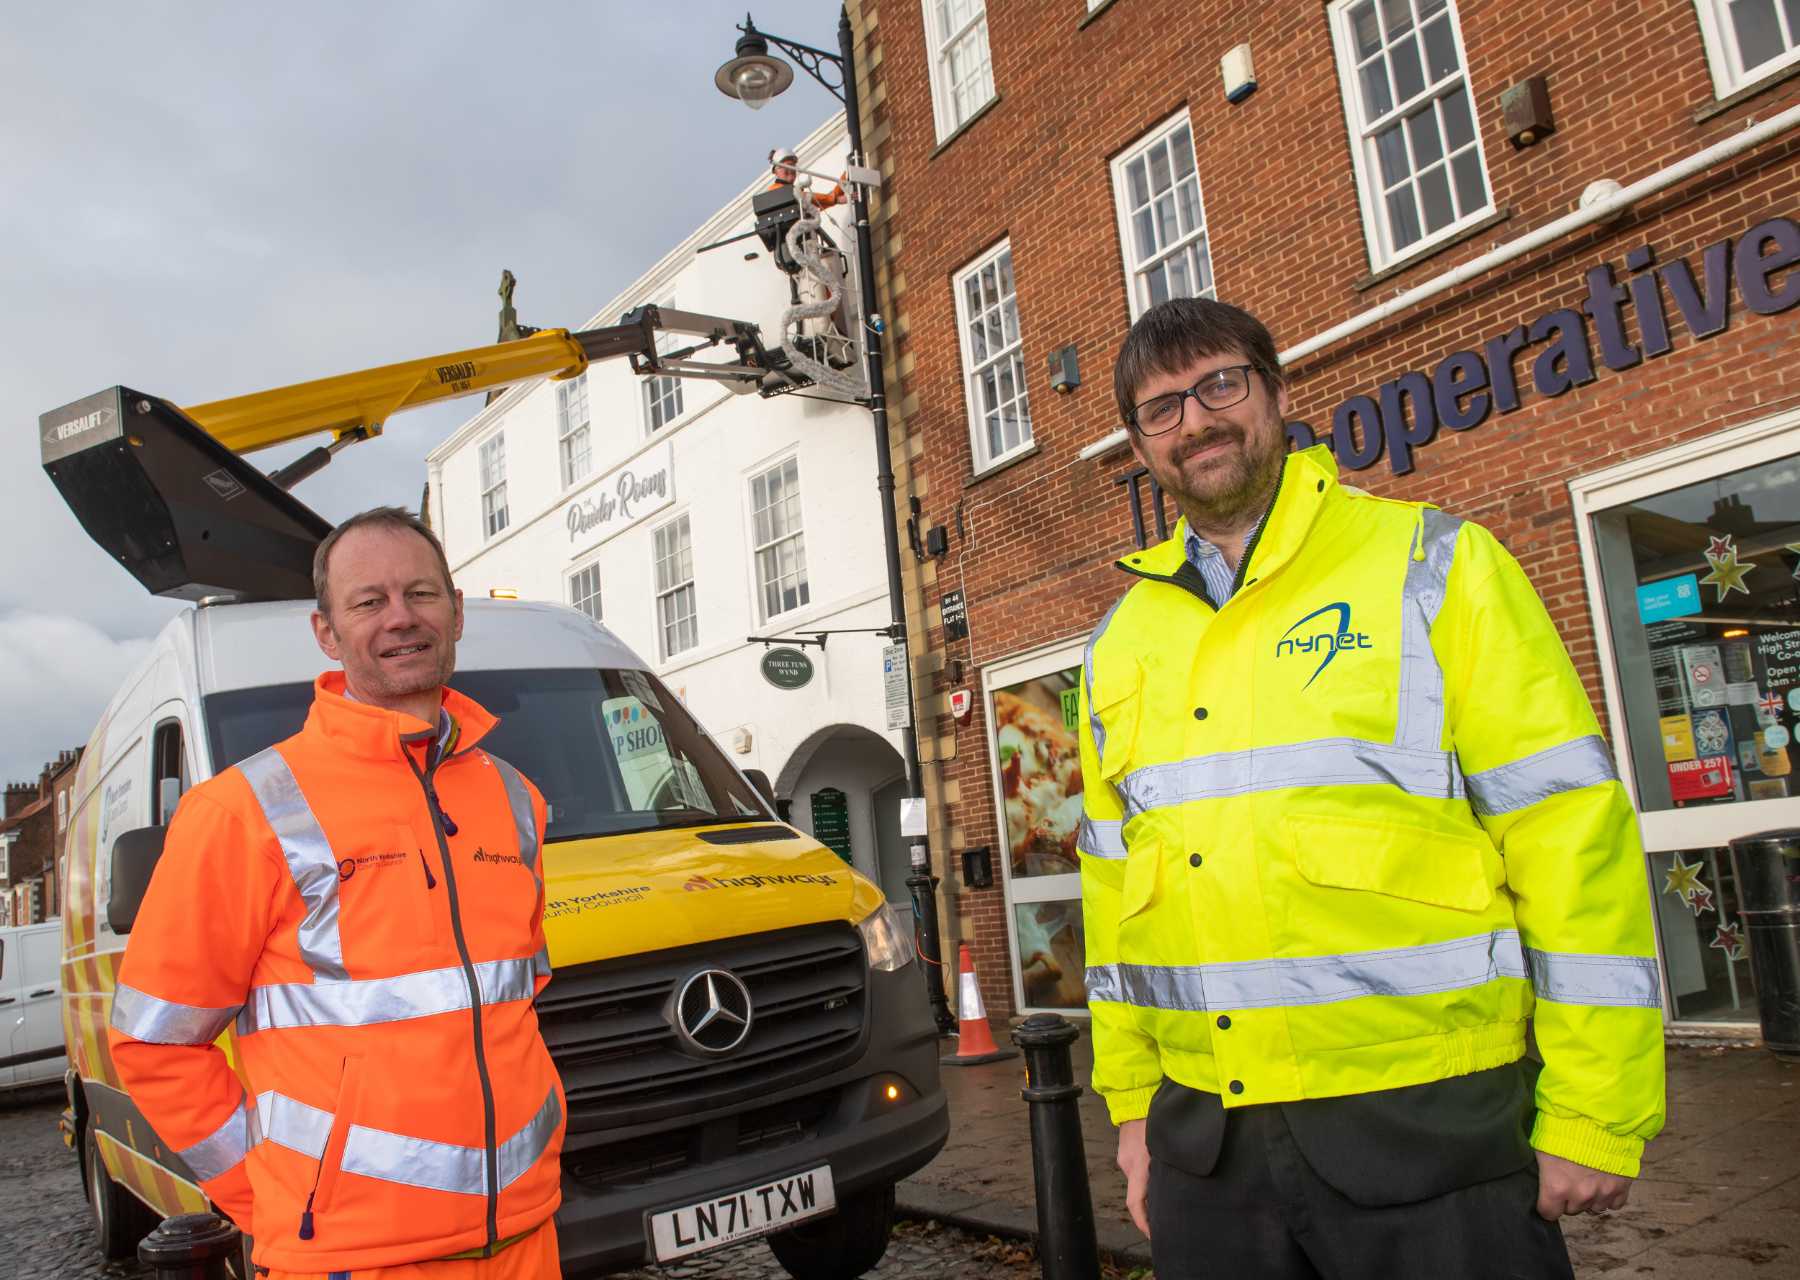 Richard Whitaker, Business Manager at NY Highways (left) and Alastair Taylor, Deputy Chief Executive at NYnet (right) at the Stokesley installation